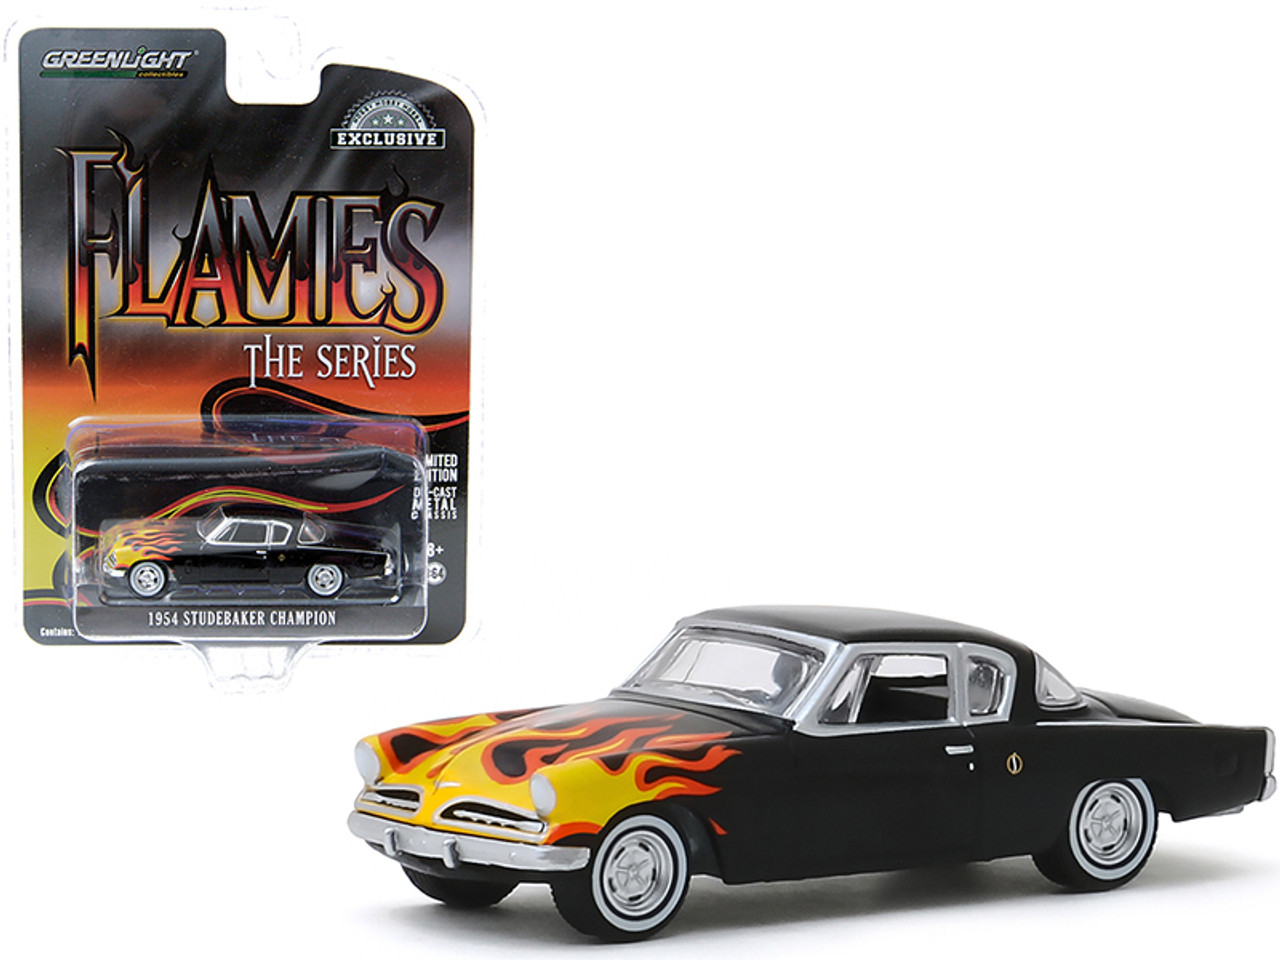 1954 Studebaker Champion Black with Flames "Flames The Series" "Hobby Exclusive" 1/64 Diecast Model Car by Greenlight